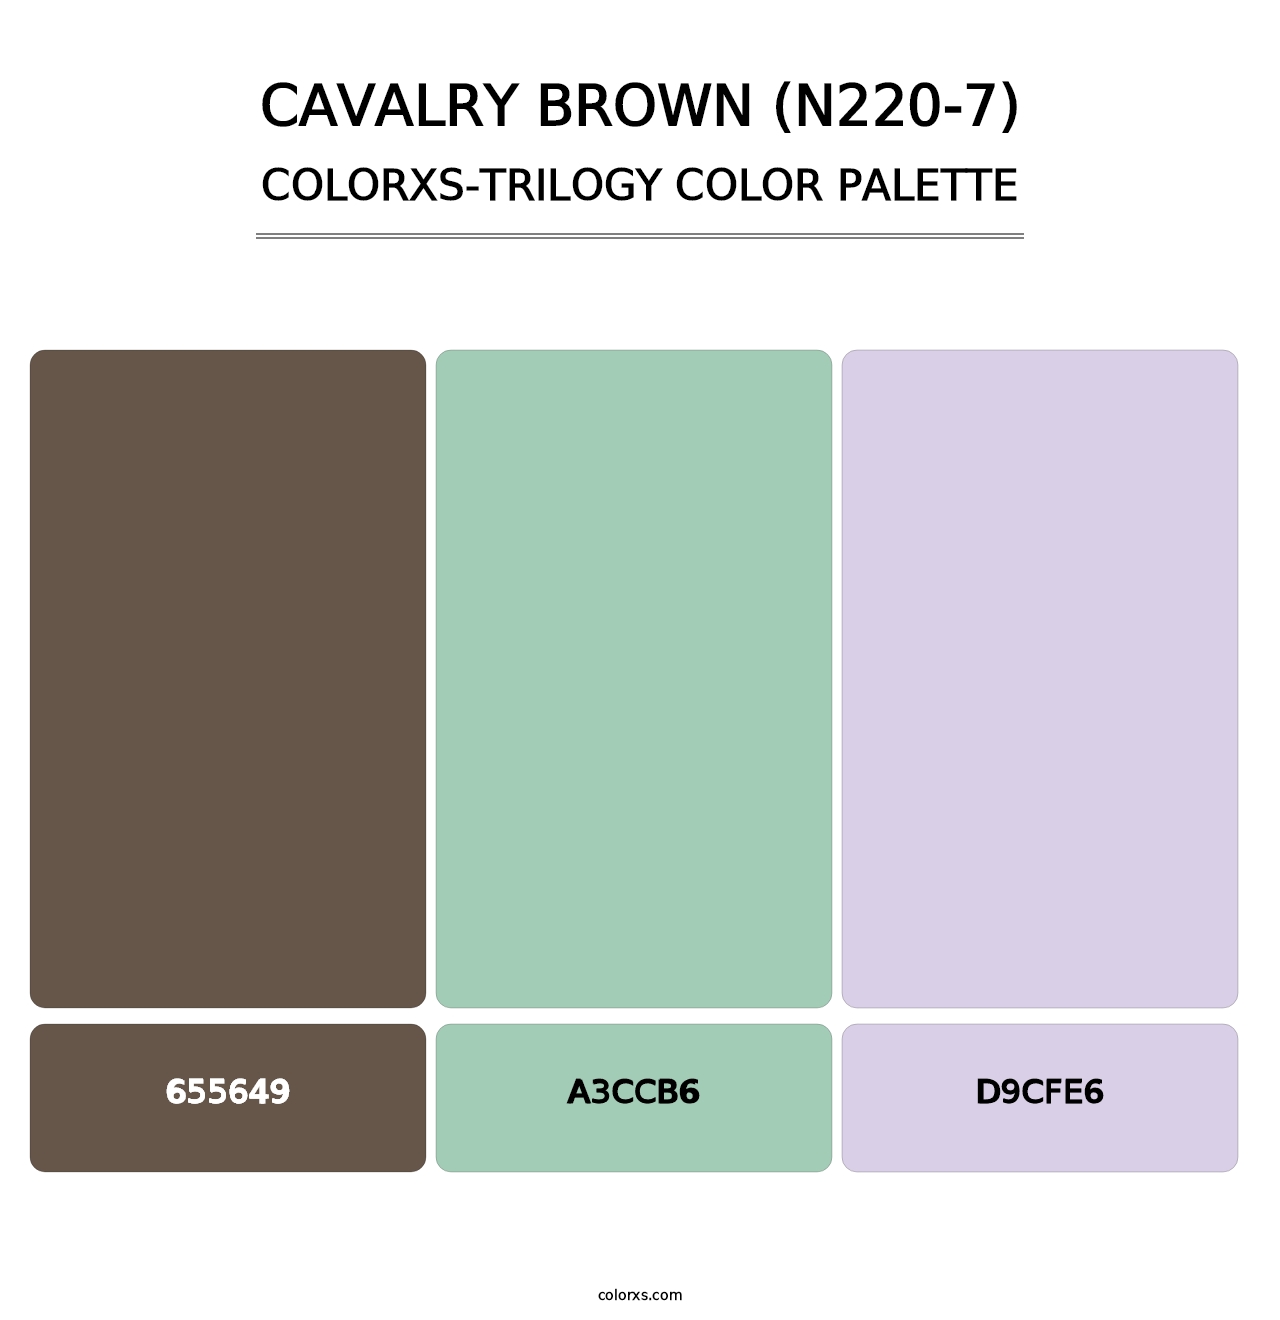 Cavalry Brown (N220-7) - Colorxs Trilogy Palette